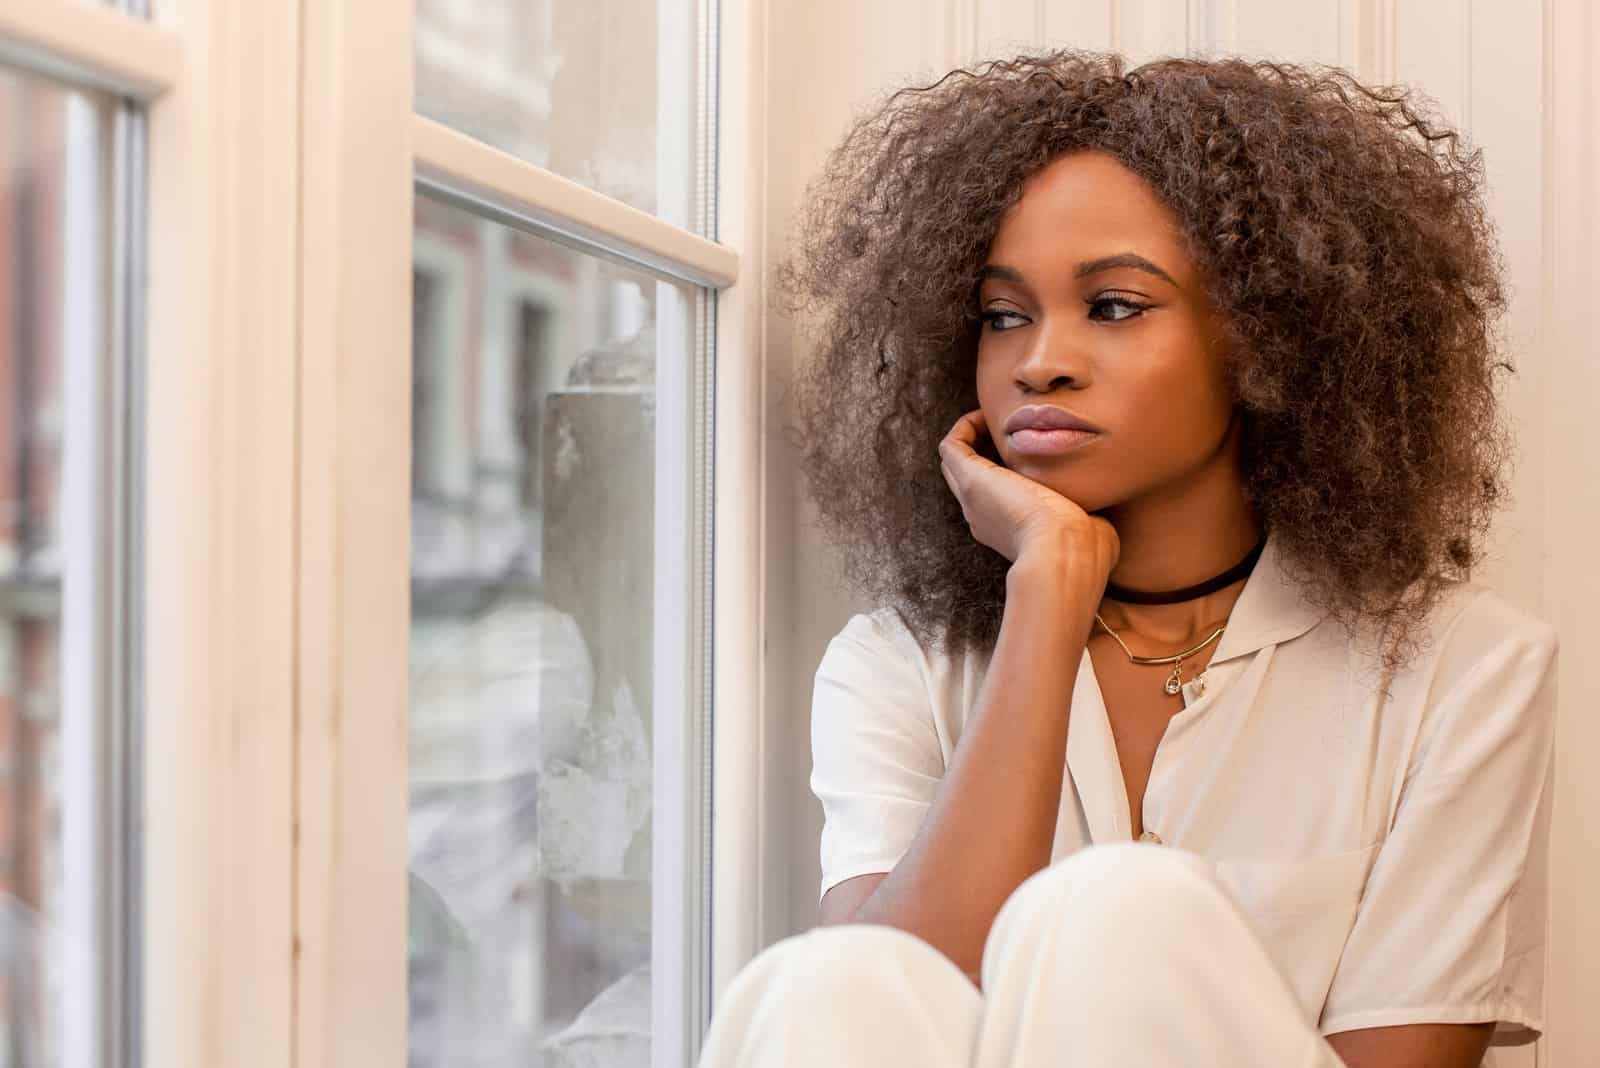 pensive woman with curly hair sitting near window